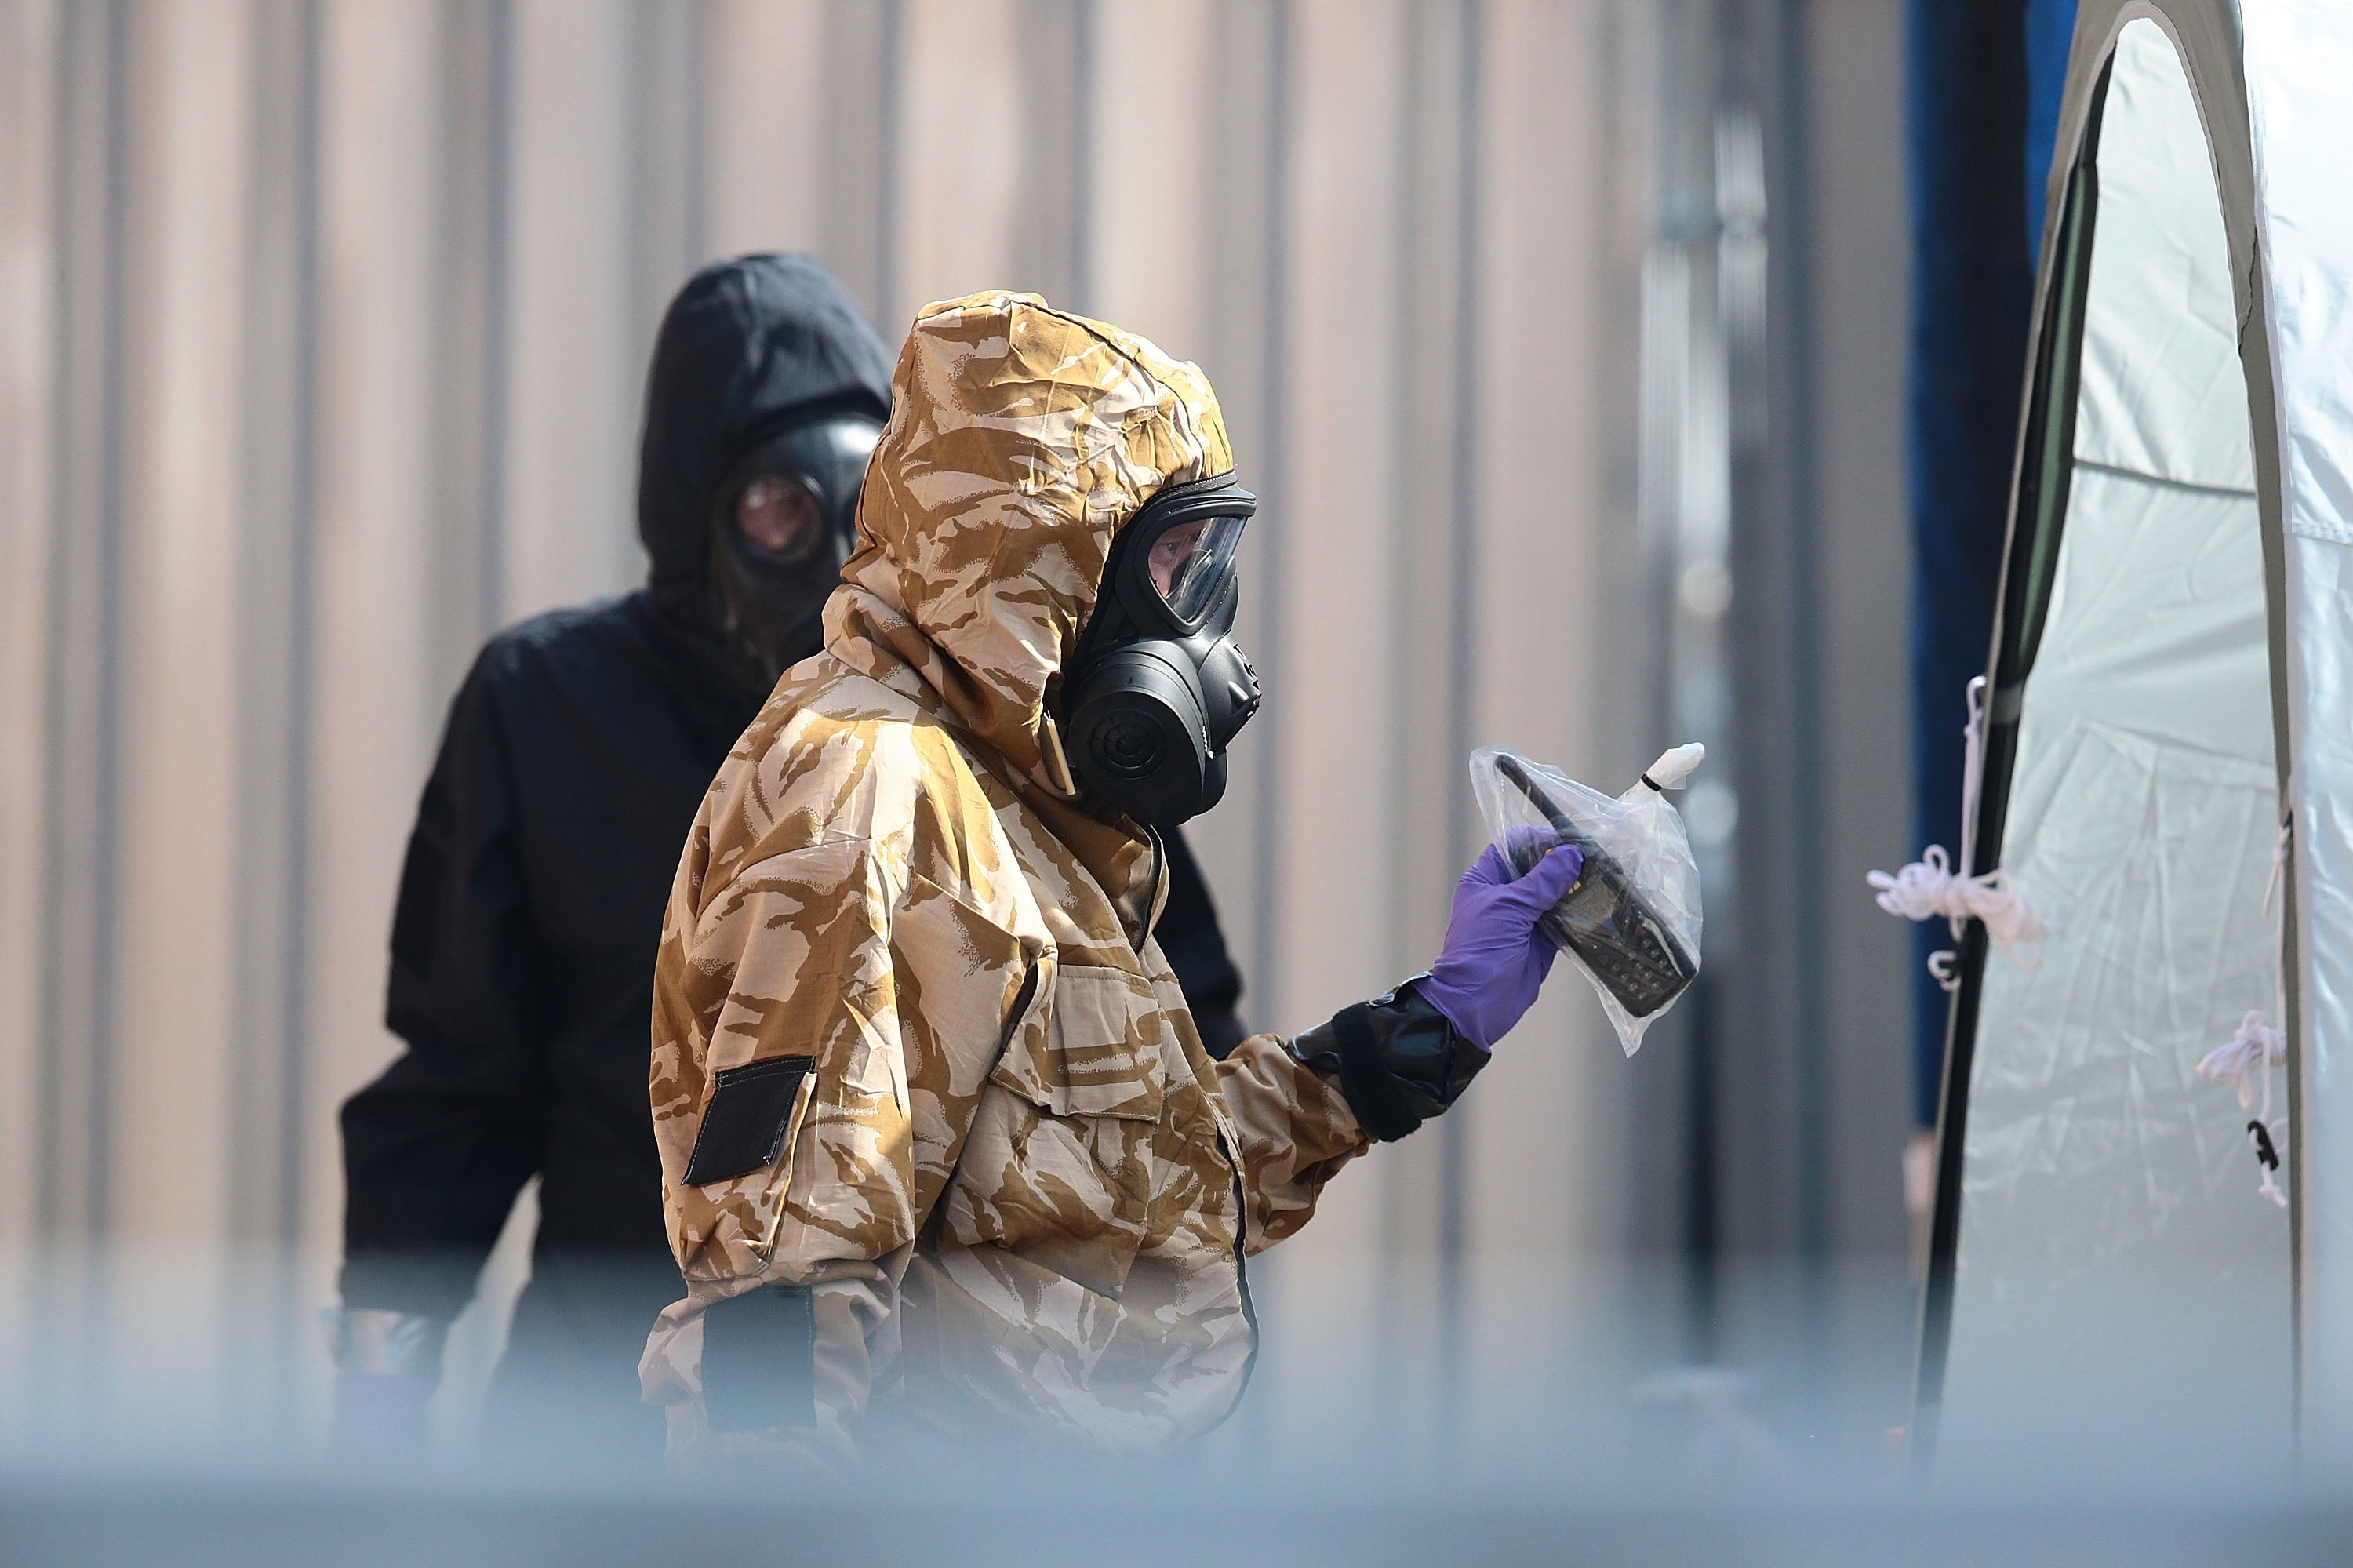 Rink tried to accuse British agents of poisoning Sergei Skripal